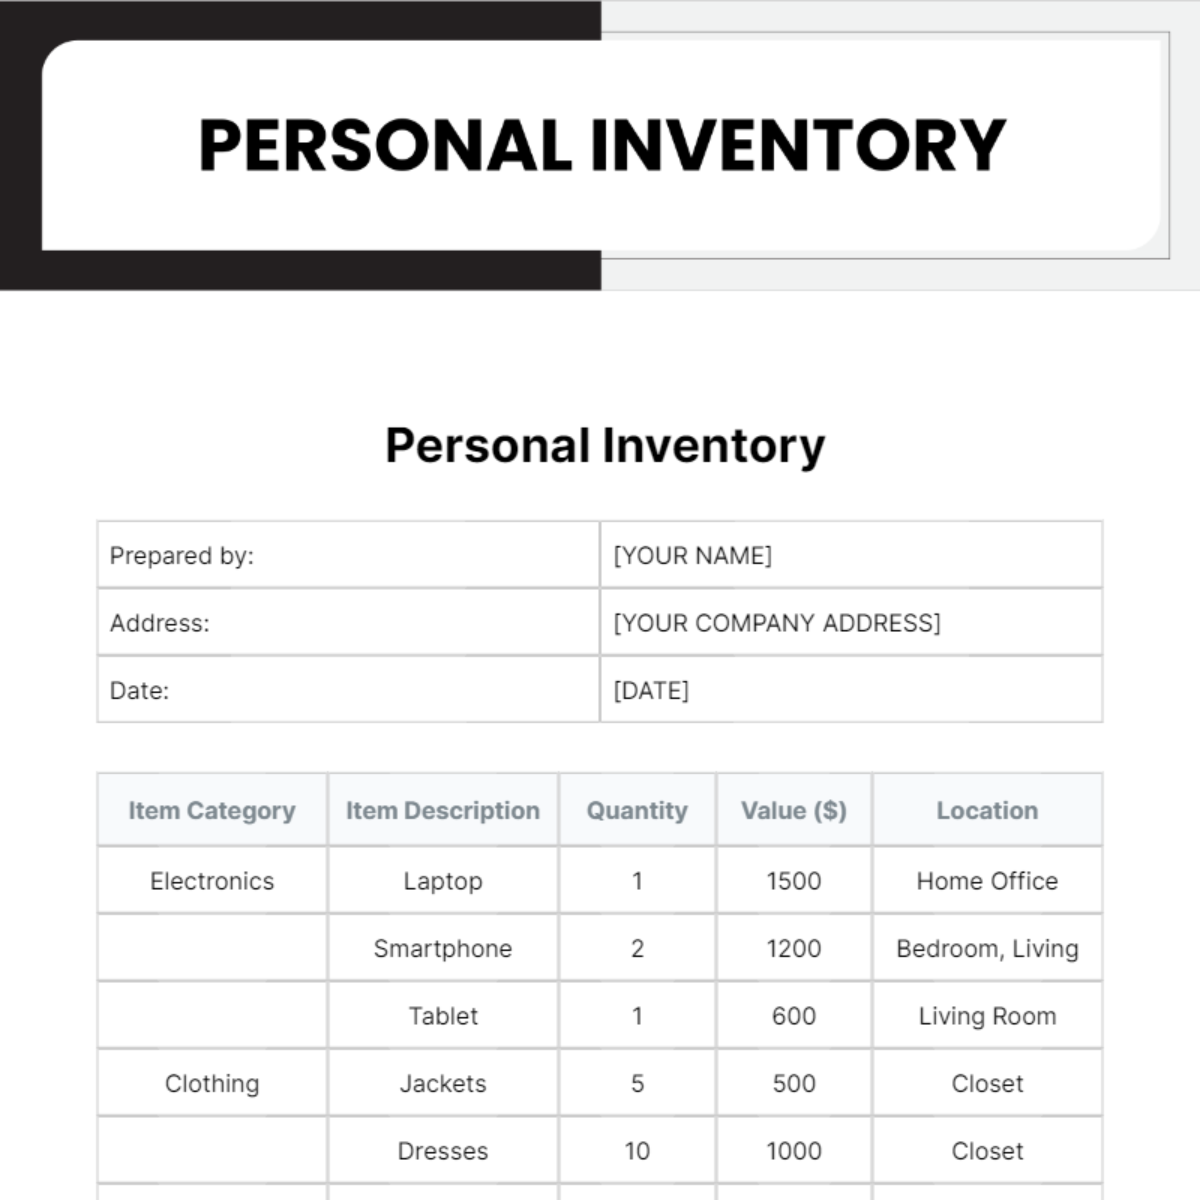 Personal Inventory Template